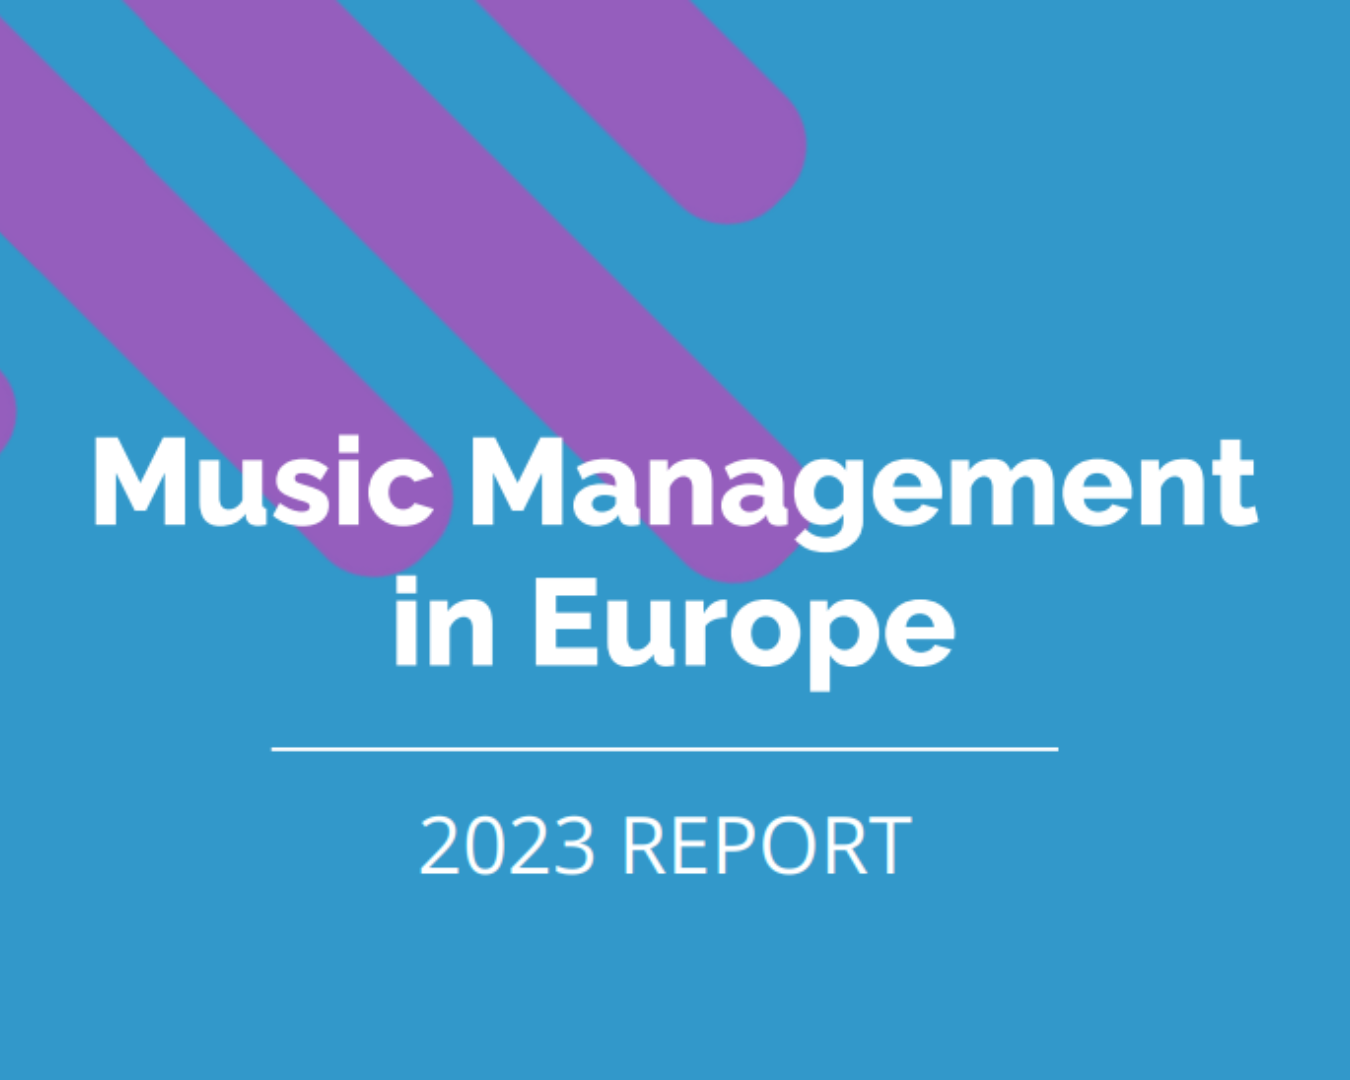 Music Management in Europe 2023 Report